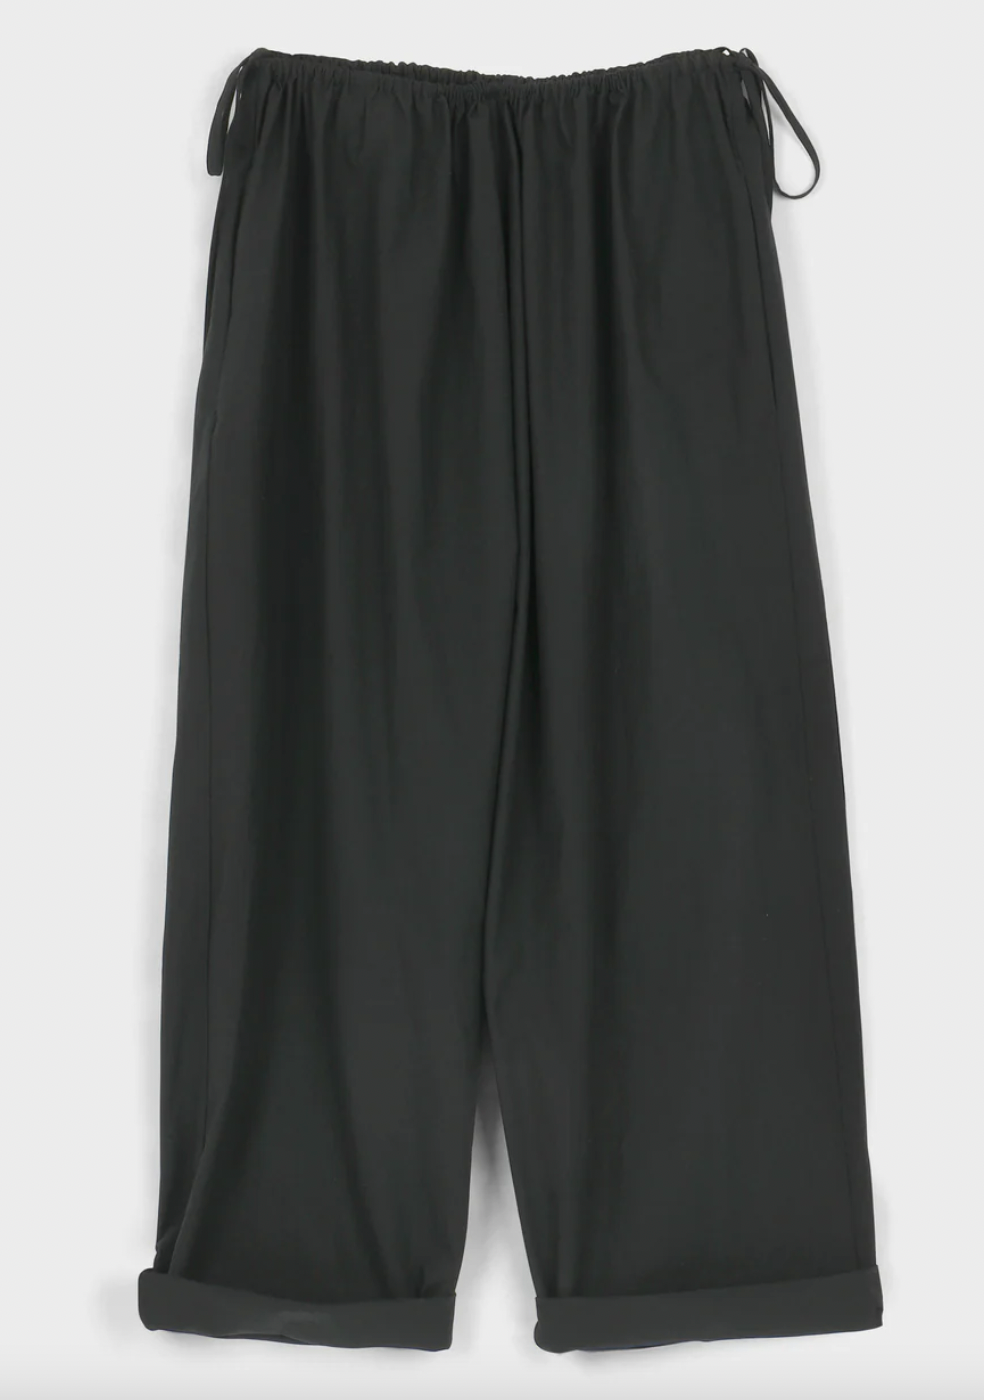 Product Image for Balloon Pants, Black